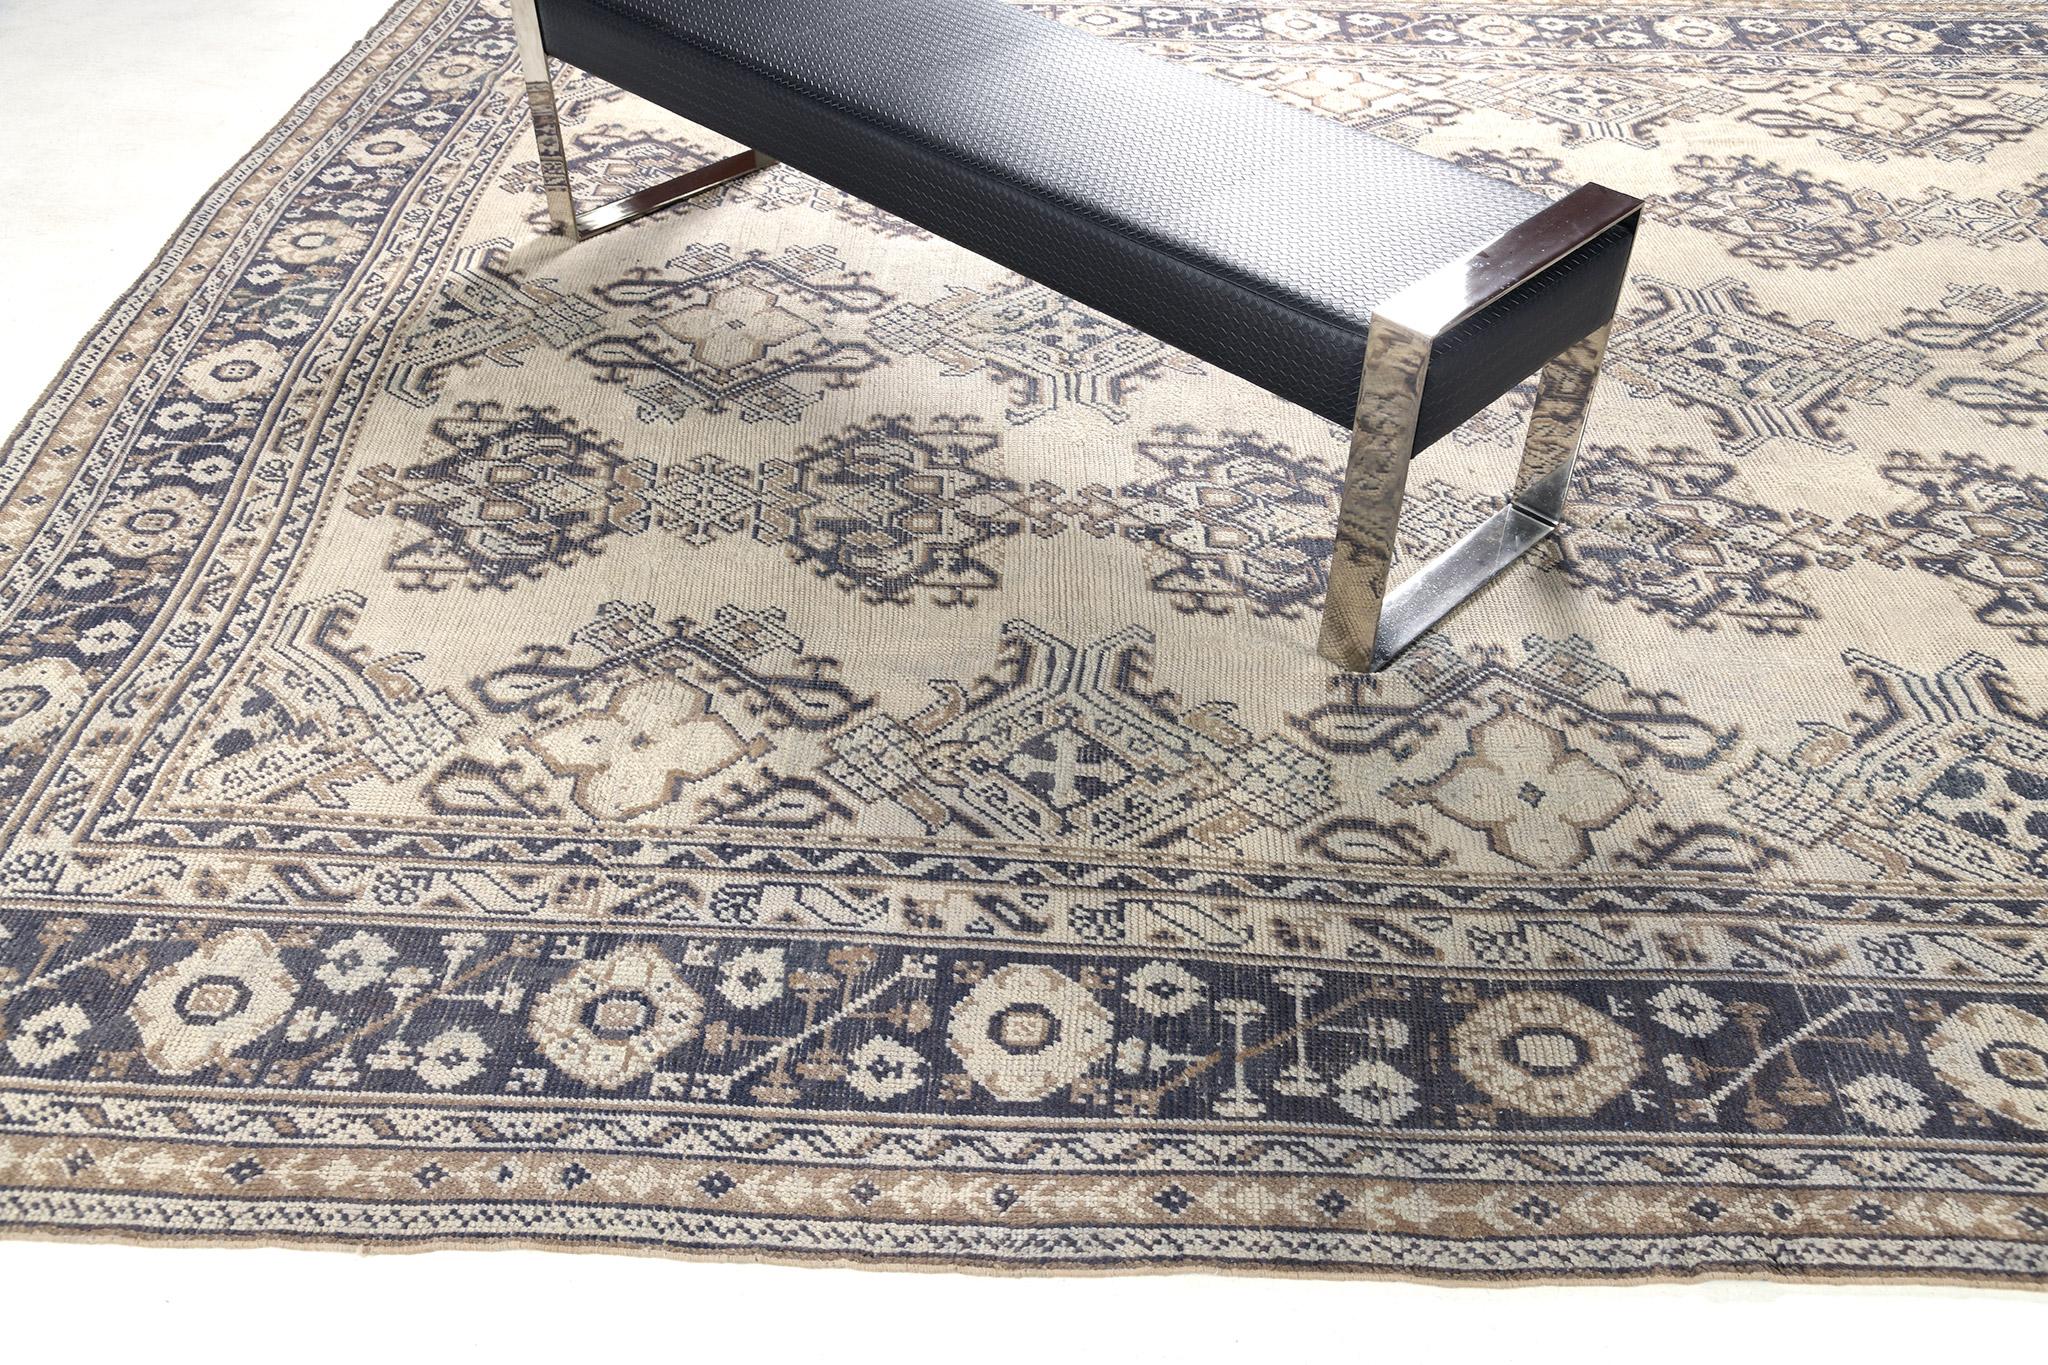 A stylish Oushak revival rug in the muted tones of ivory and aegean blue stylized gracefully with allover medallion patterns. Classic and sophisticated, this rug from hand spun wool is framed by a complementary border filled with elements that form